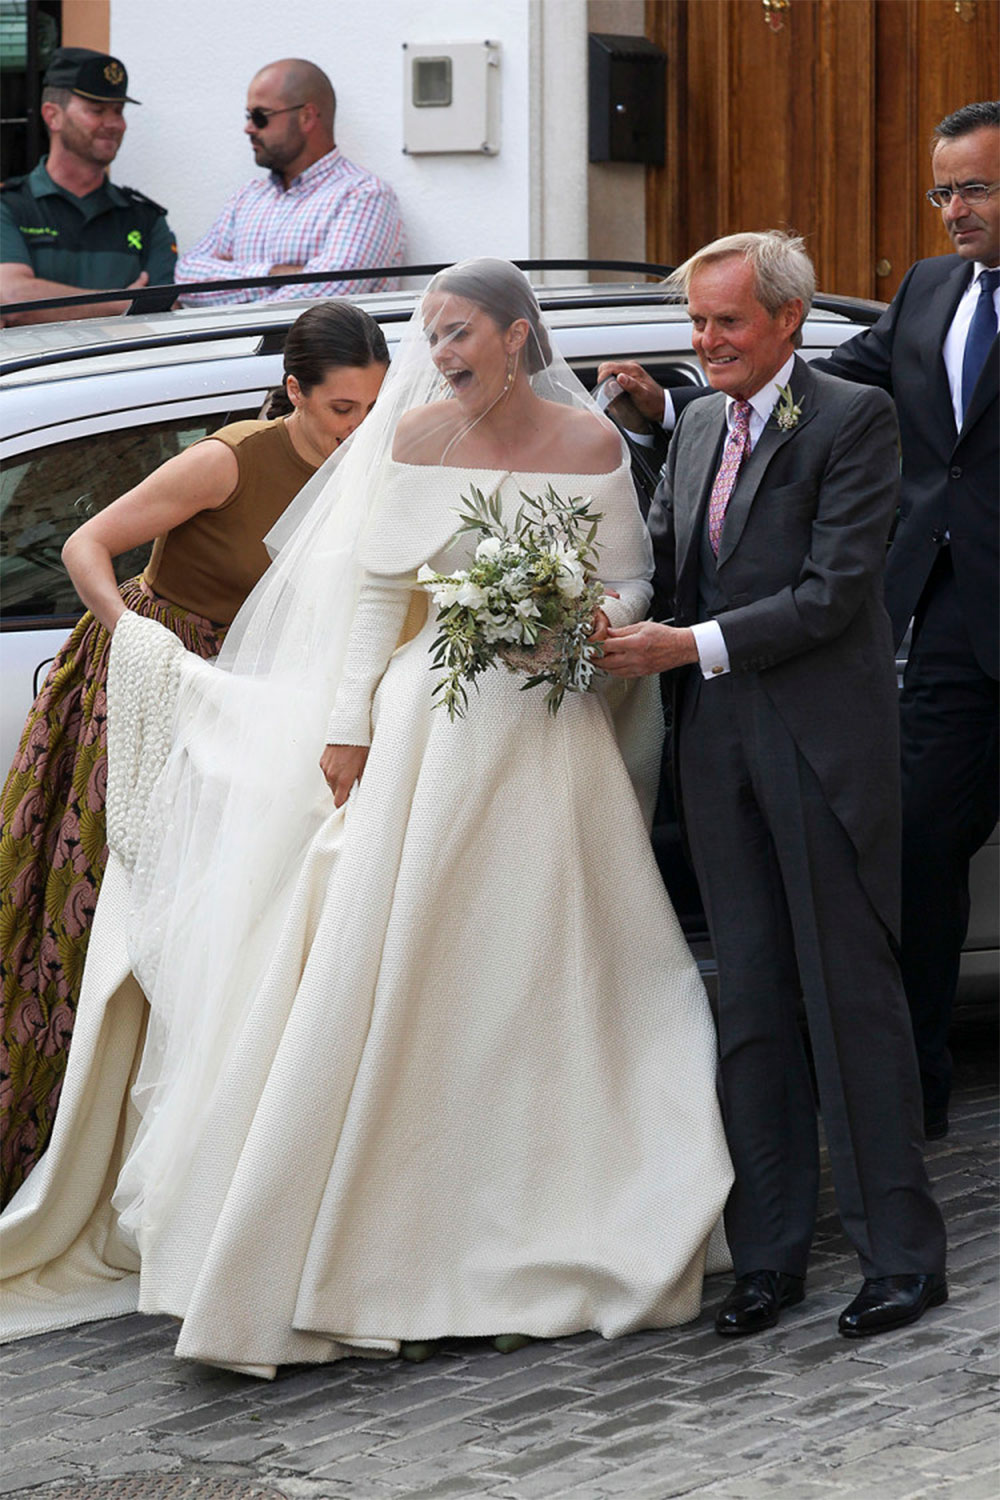 Lady Charlotte Wellesley, daughter of the Duke of Wellington and Princess Antonia of Prussia (a direct descendant of Queen Victoria), married her own Prince Charming – American-Colombian businessman Alejandro Santo Domingo – wearing a custom Emilia Wickstead dress.